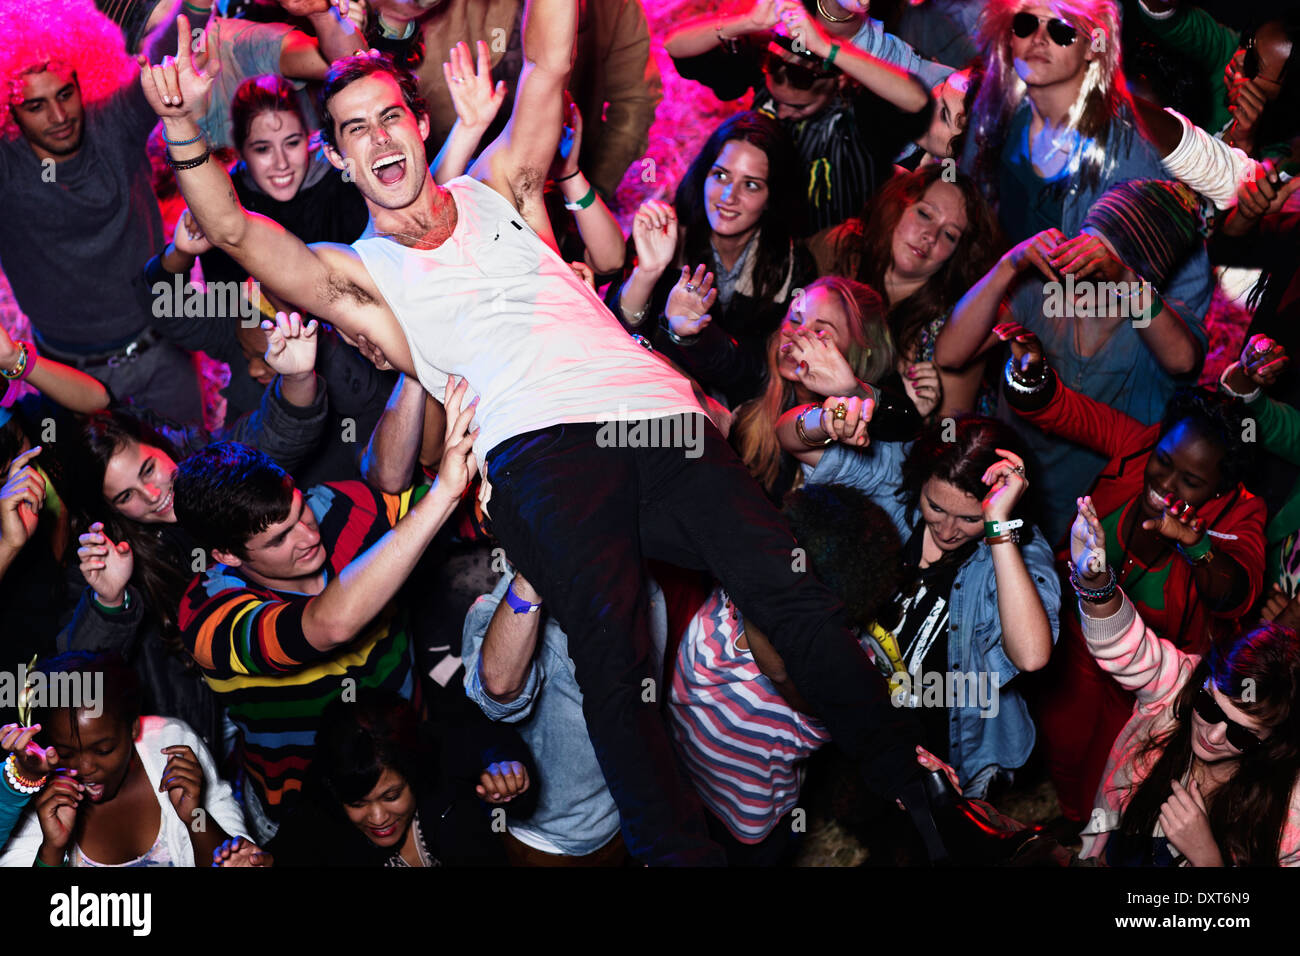 Man crowd surfing at music festival Stock Photo